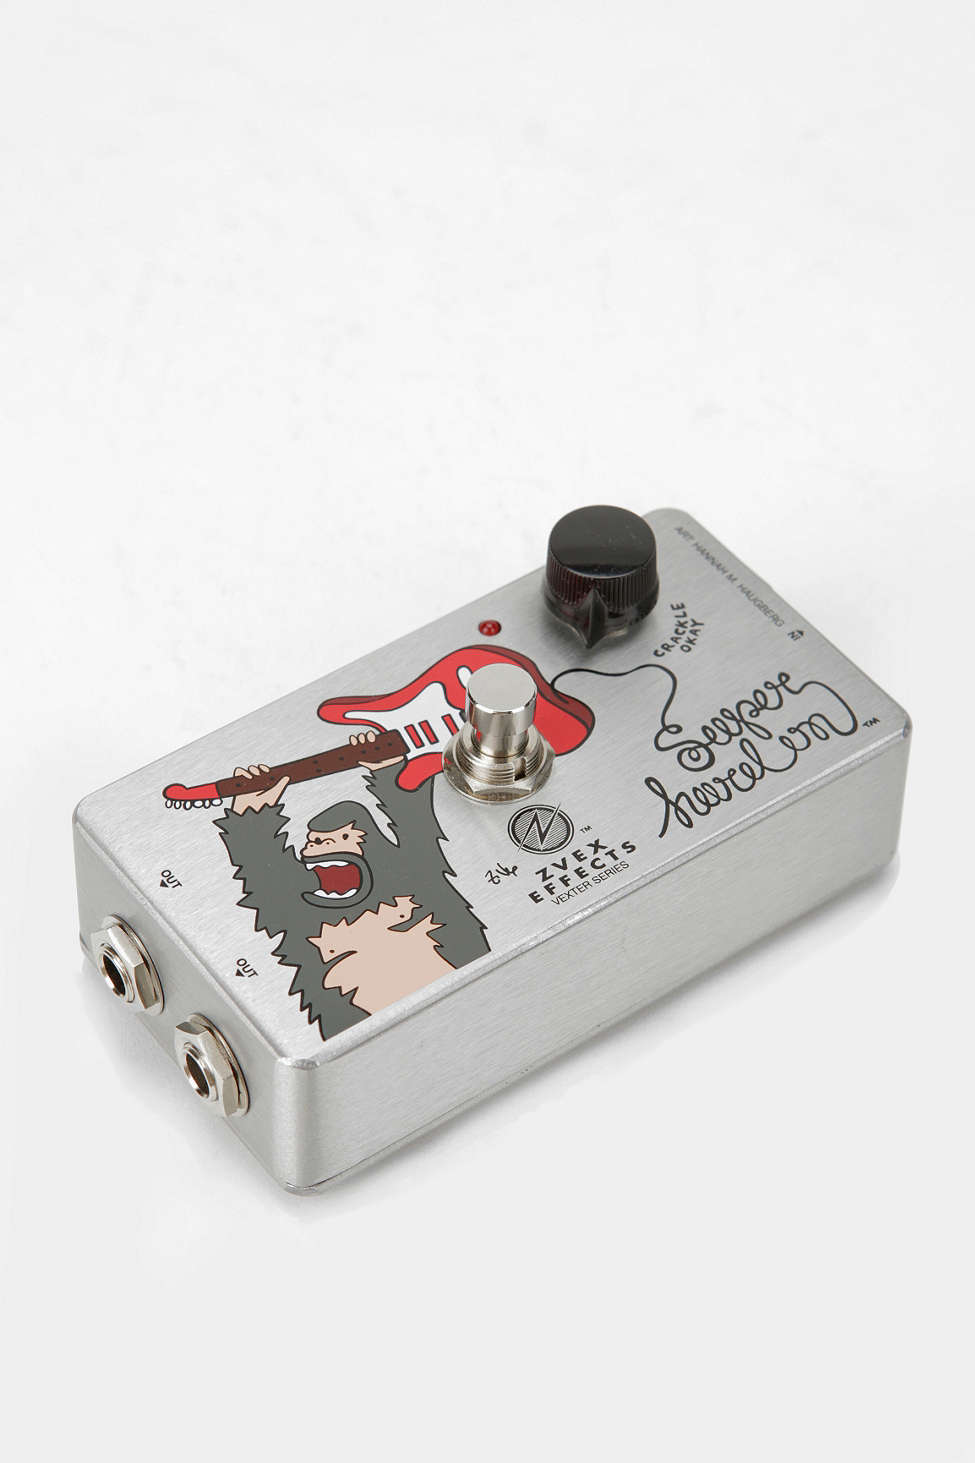 Hand-on Effect Pedal